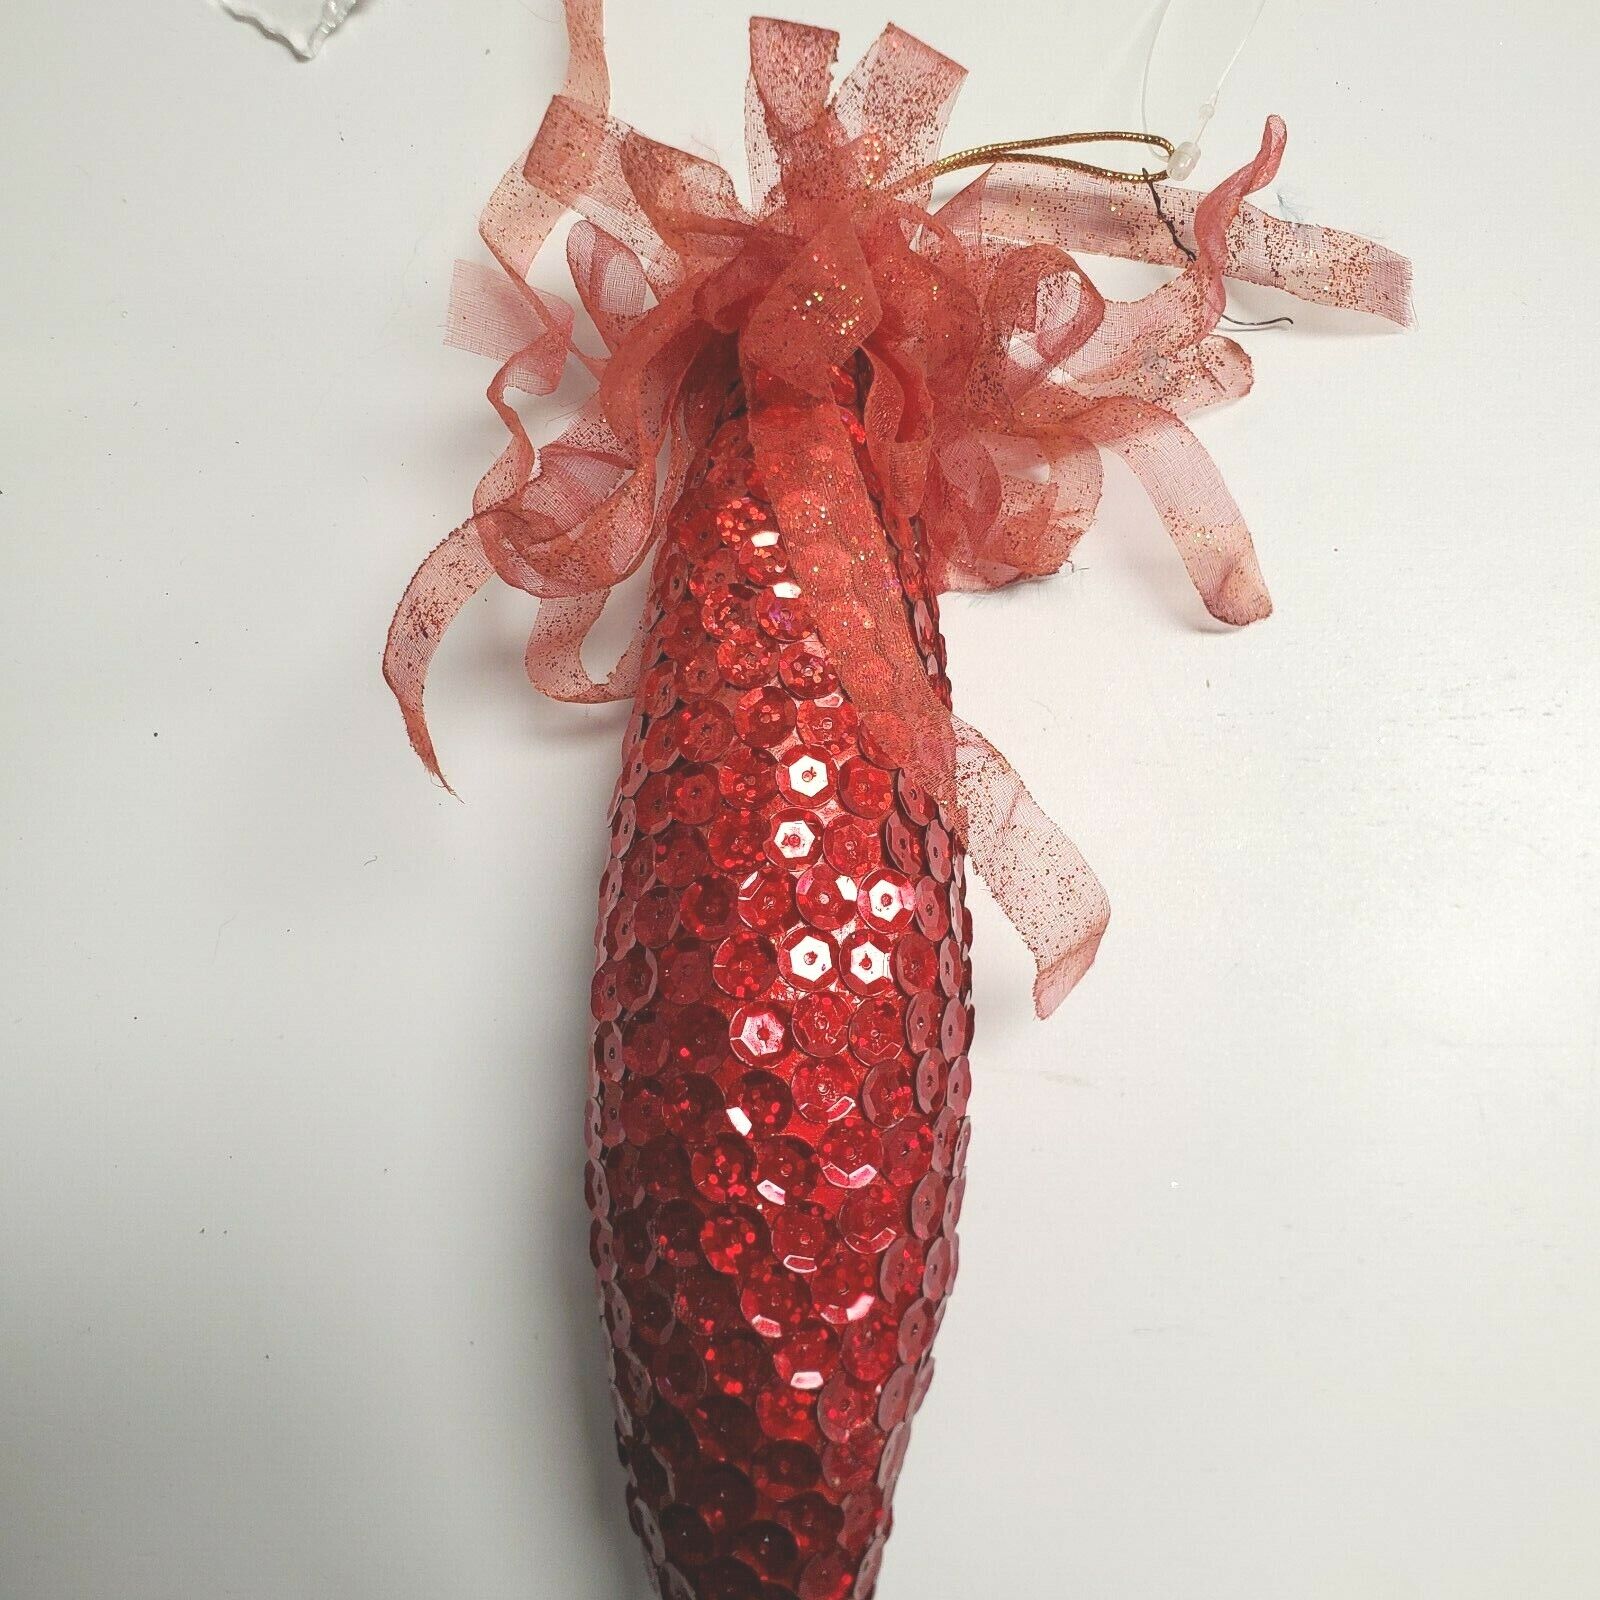 1 Sequin Encrusted Red Ornament With Sheet Glitter Ribbon on top Christmas